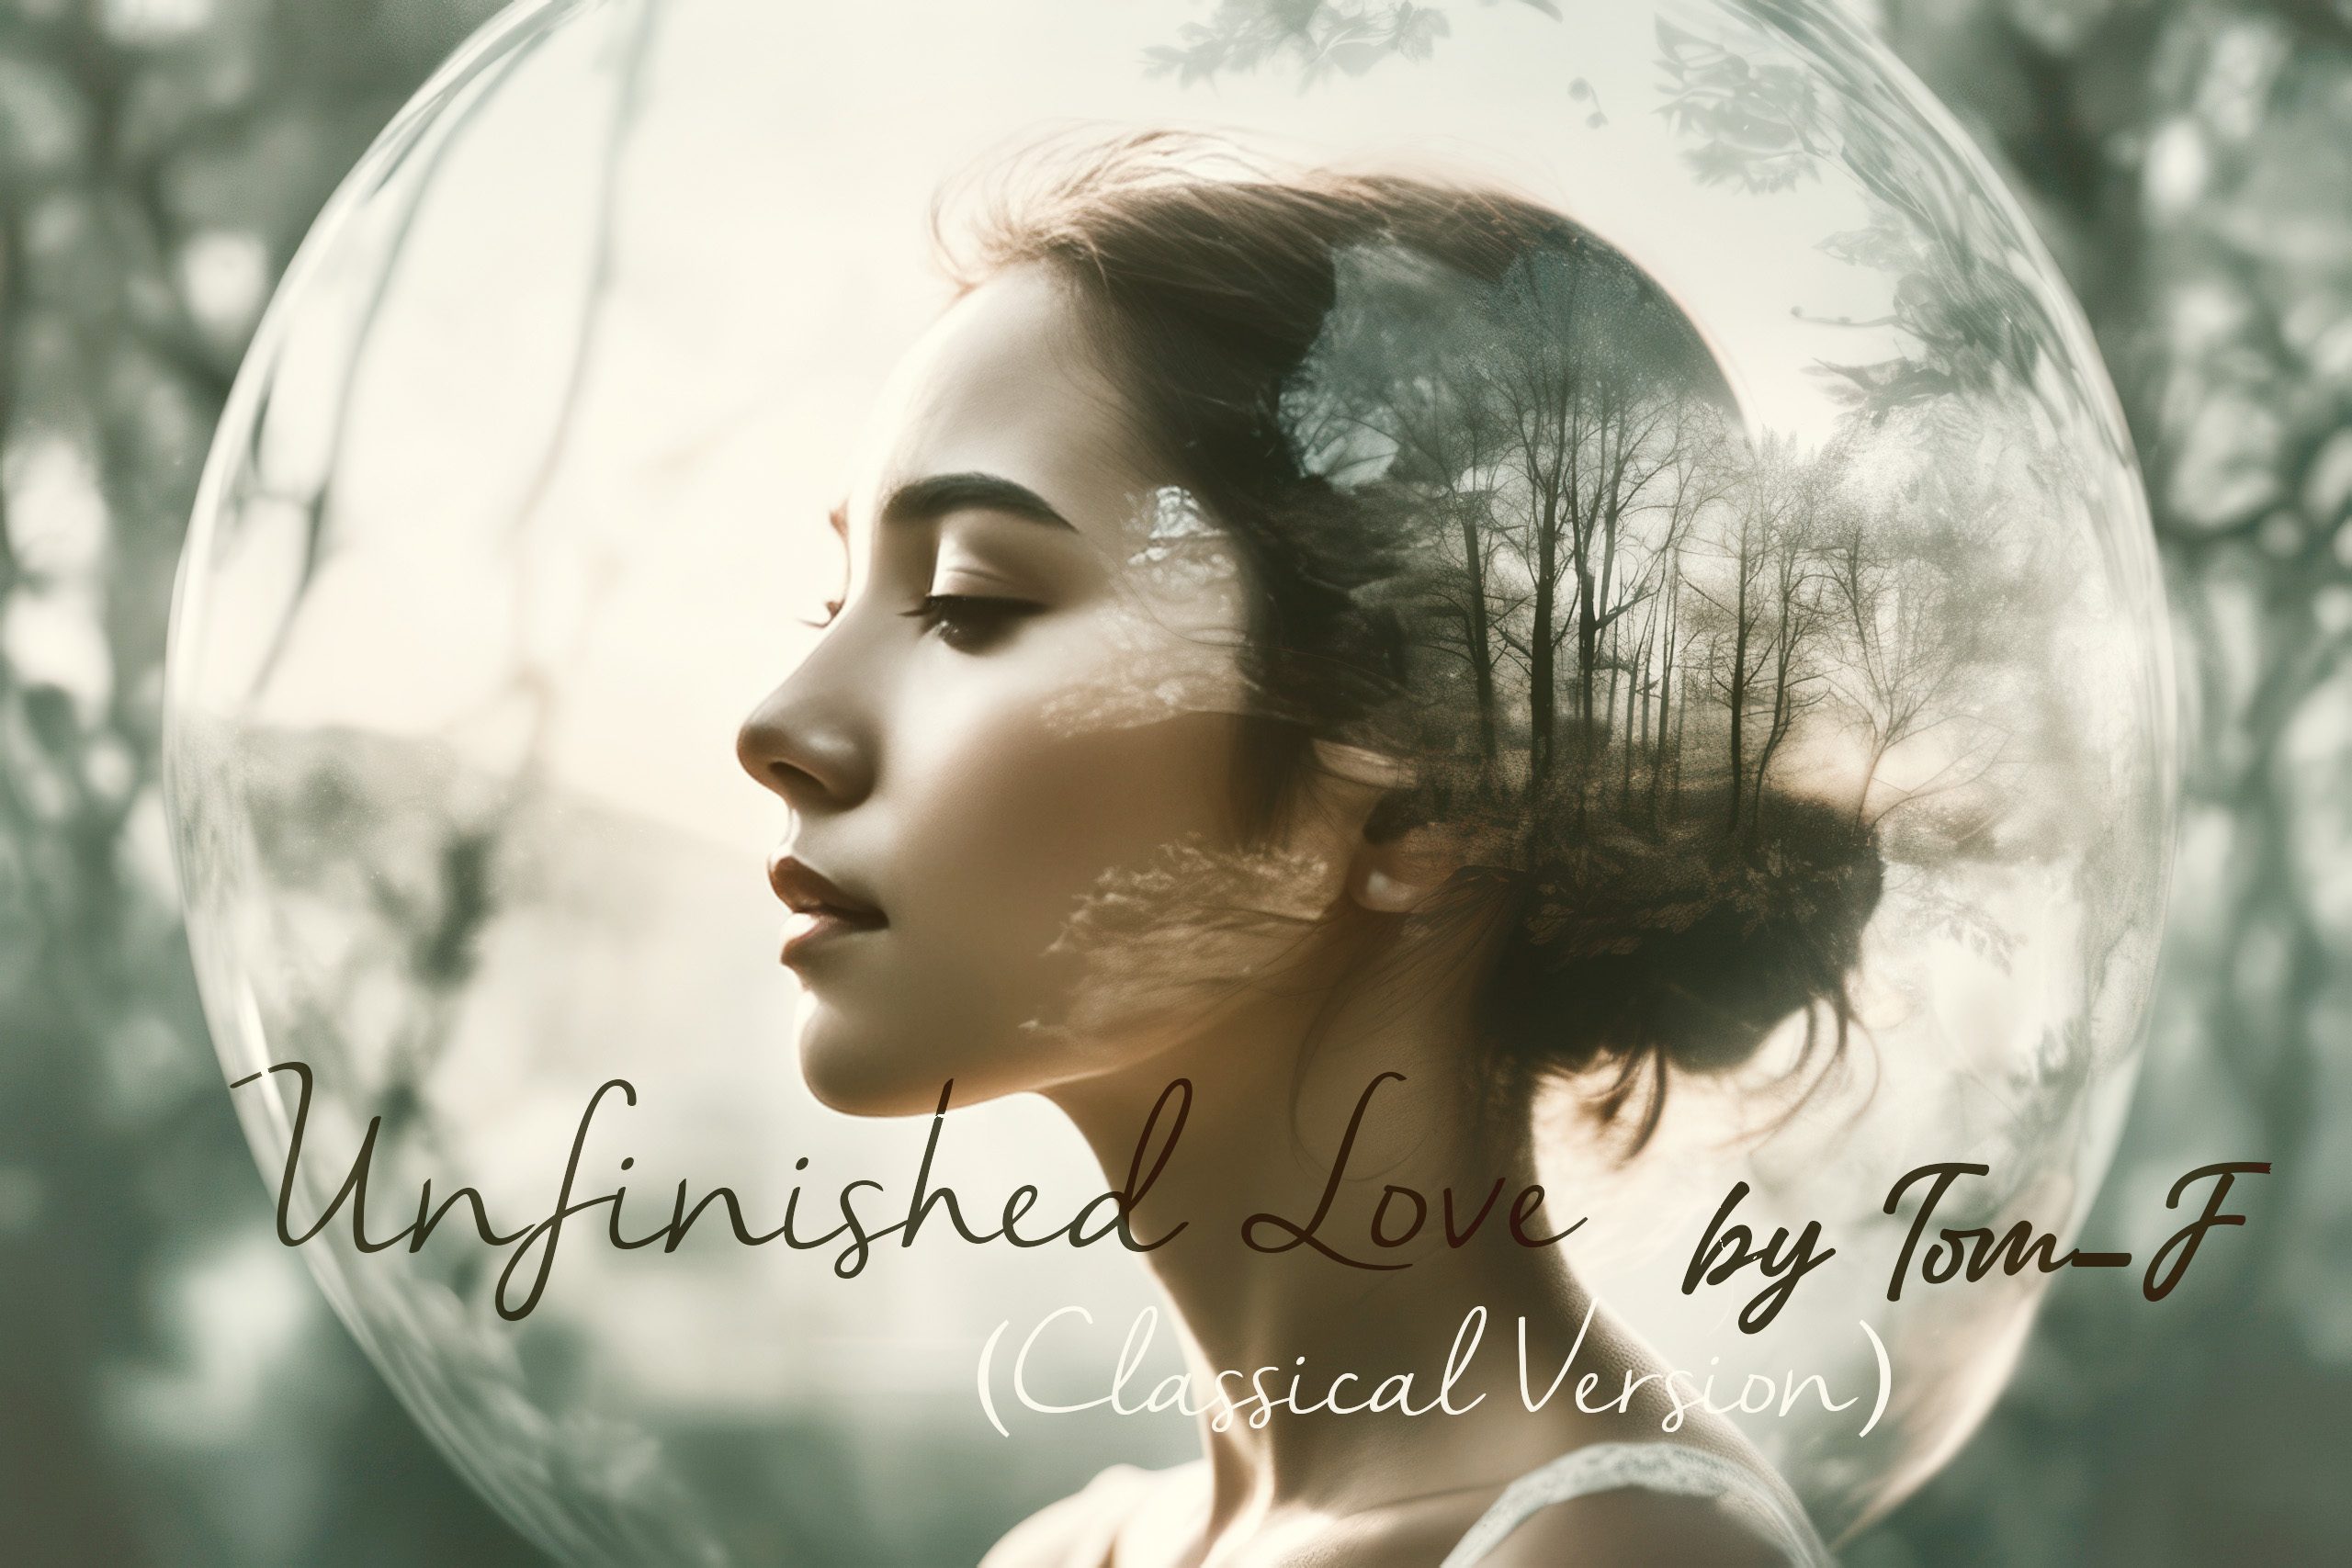 Unfinished Love (Classical Version)